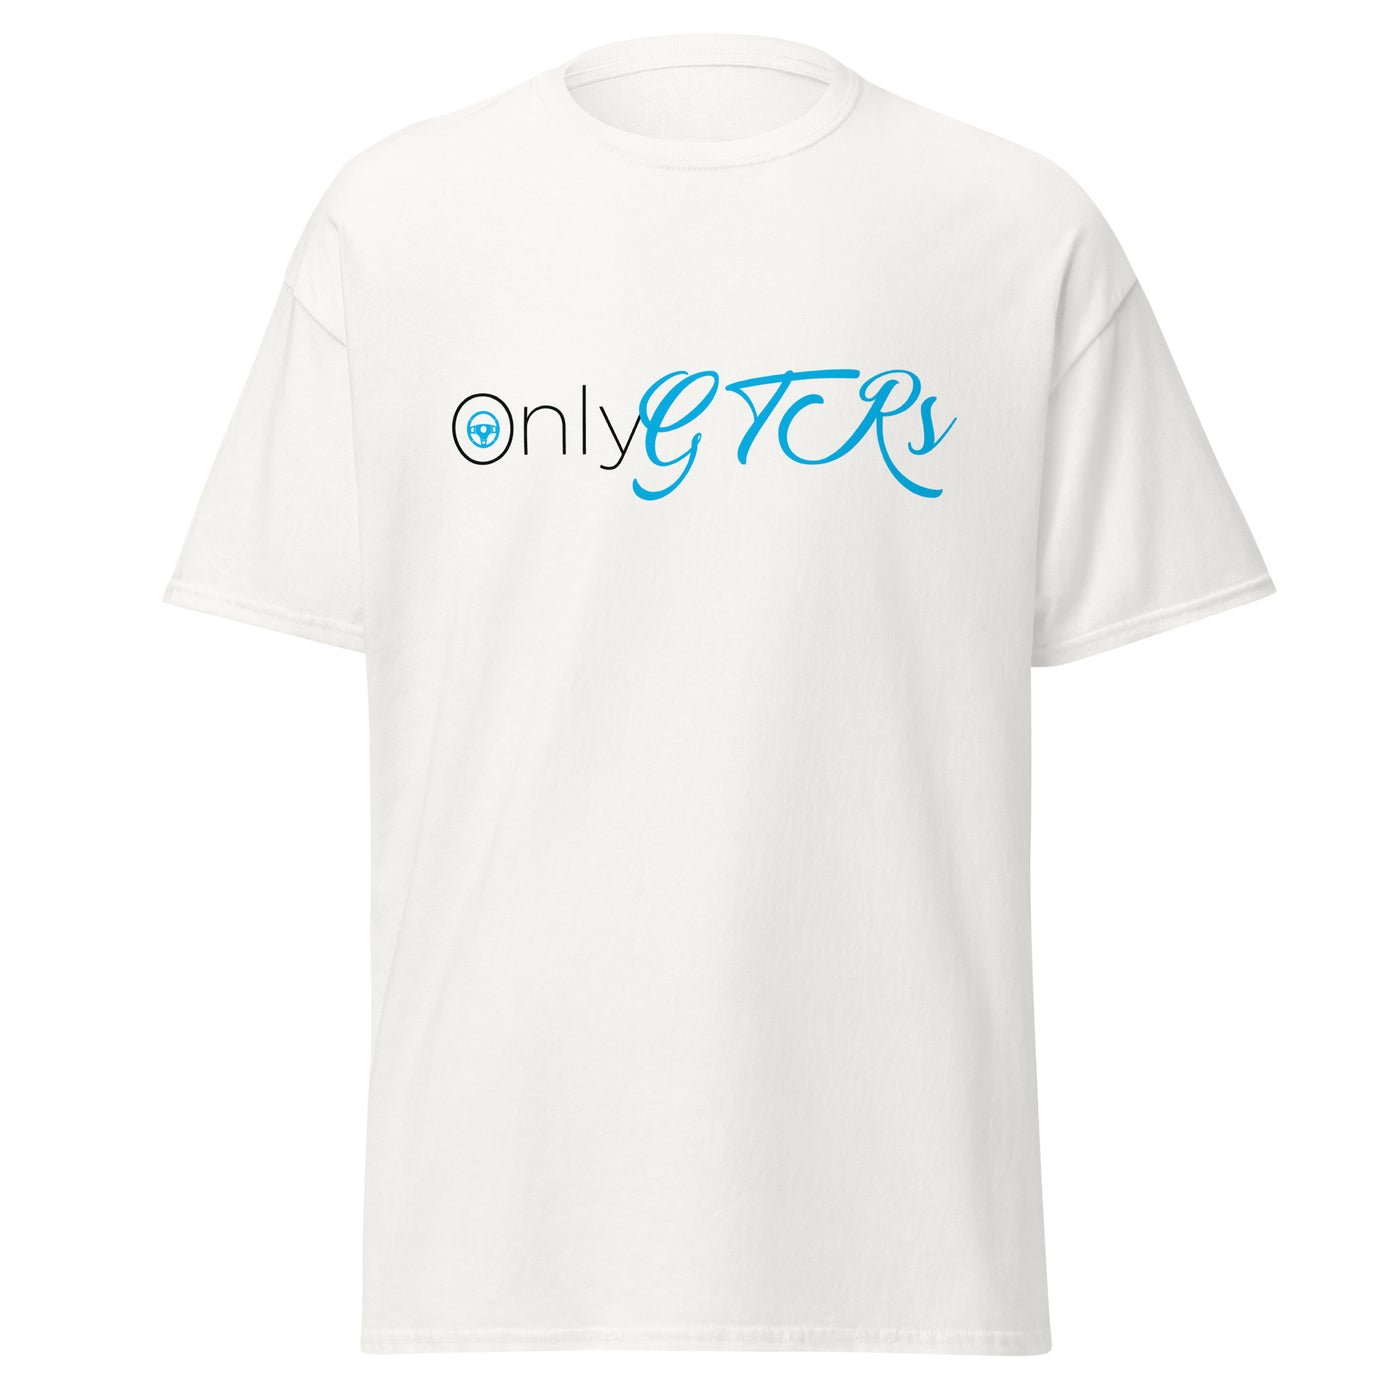 Only GTRs Tee (White)